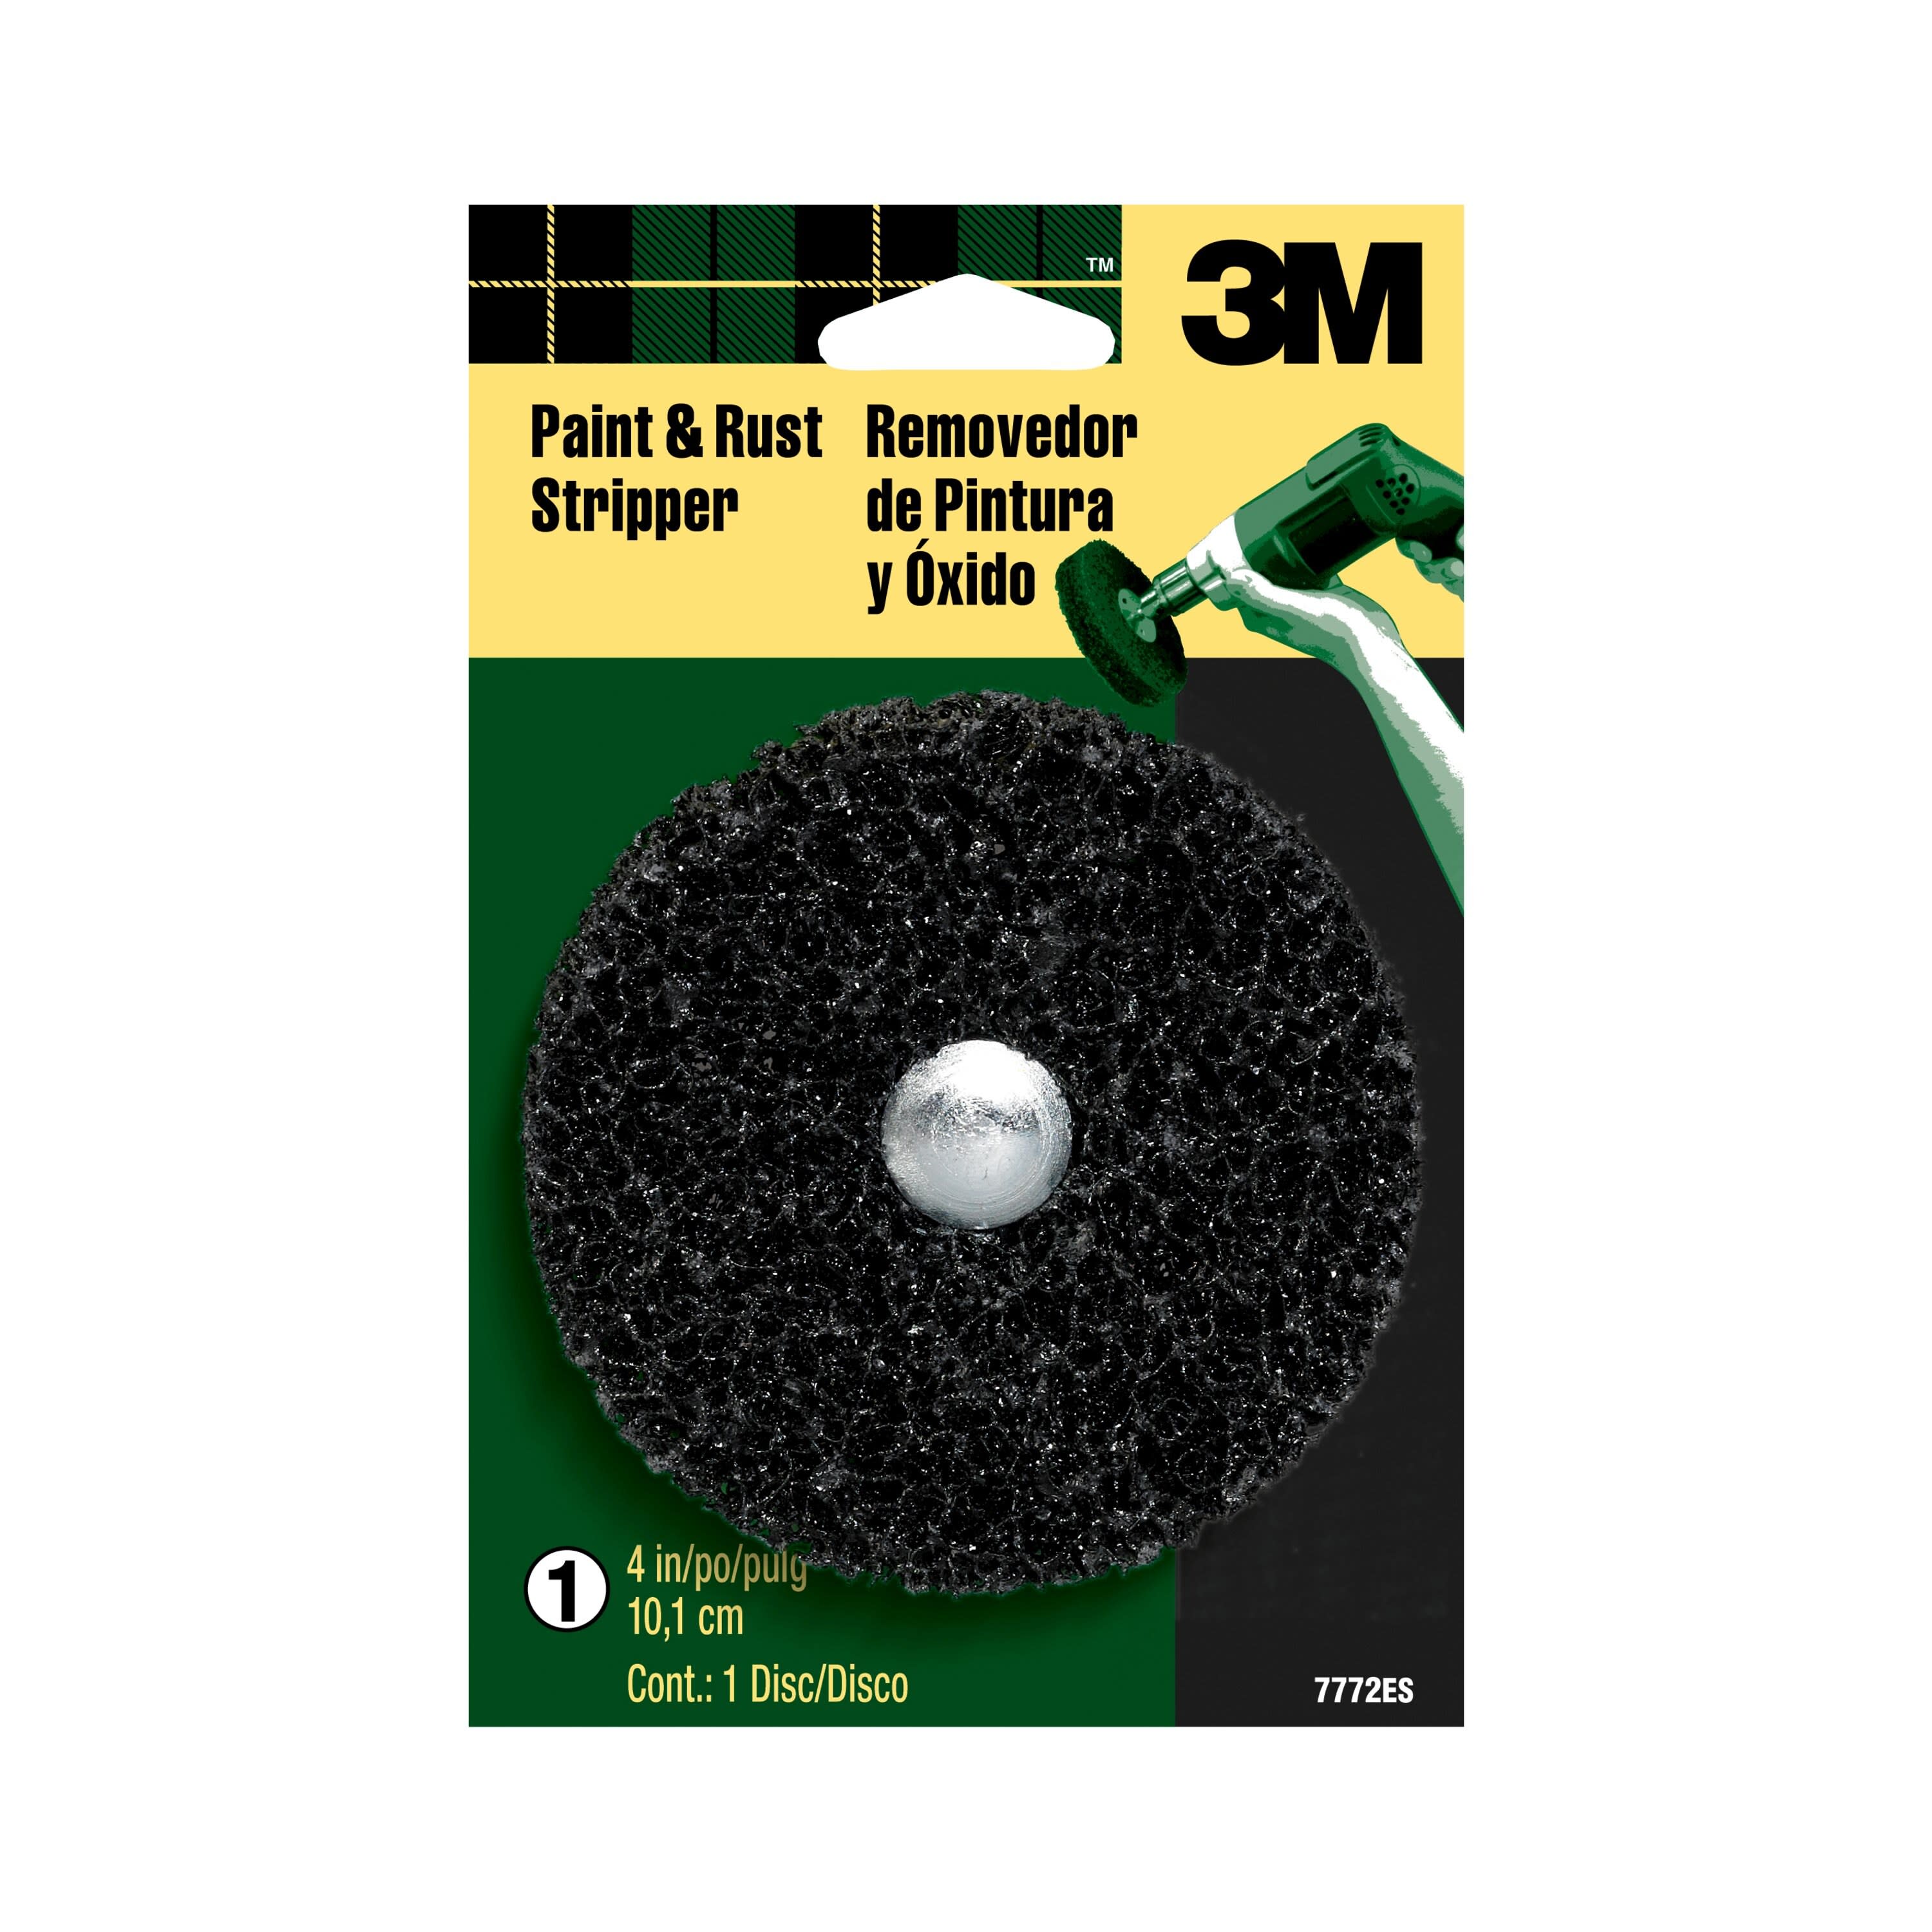 101mm LARGE AREA PAINT & RUST STRIPPER Grinding Disc for Electric Drill 3M 4" 